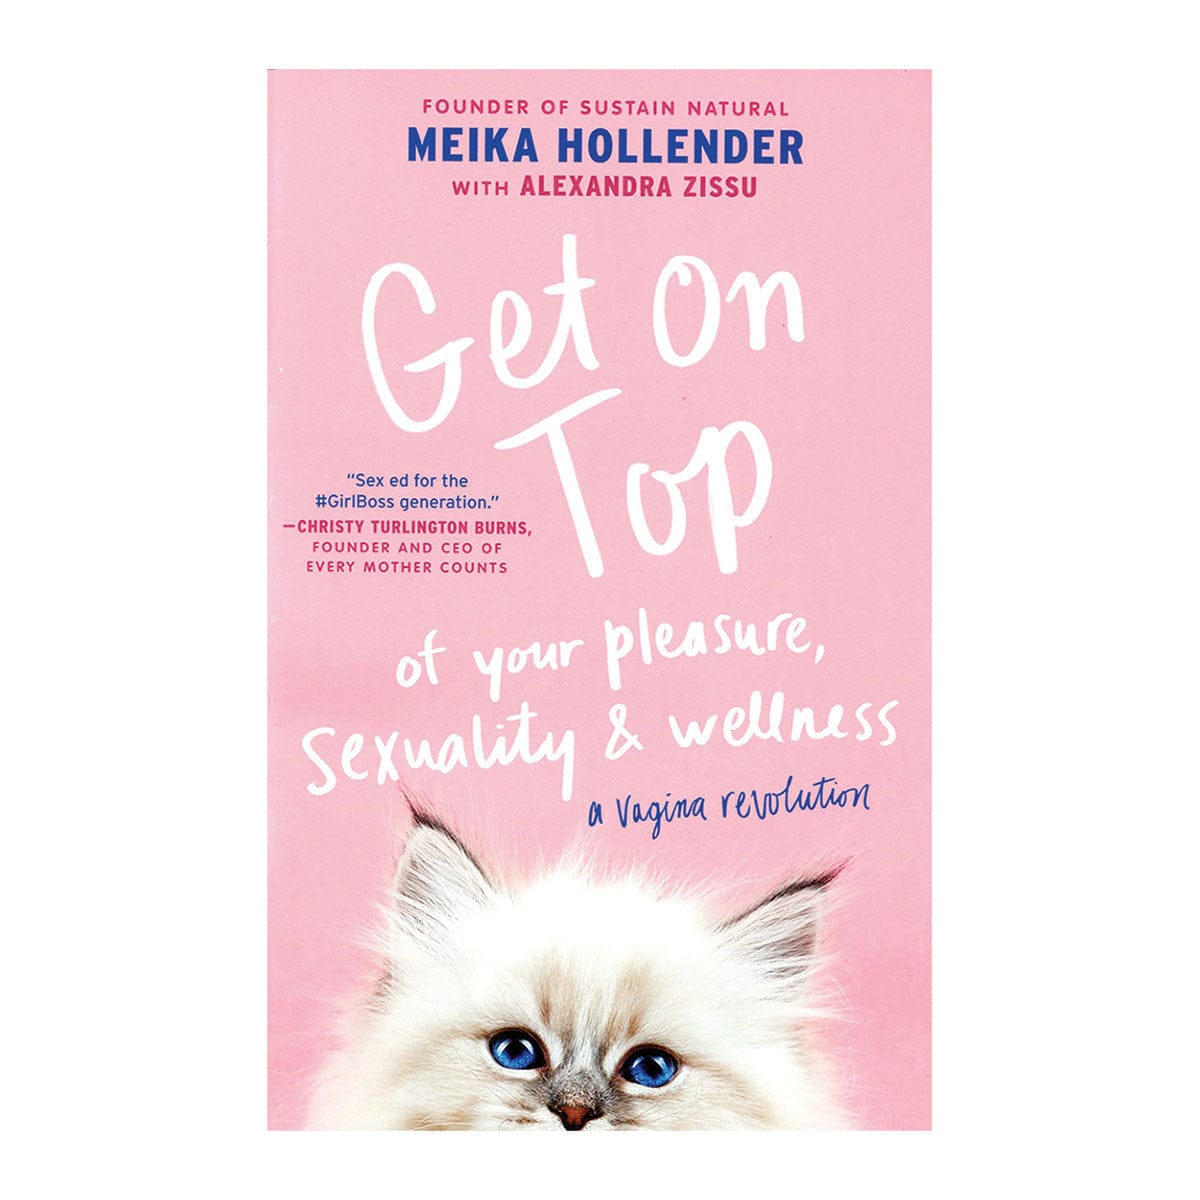 GET ON TOP OF YOUR PLEASURE, SEXUALITY &amp; WELLNESS by Simon + Schuster - rolik